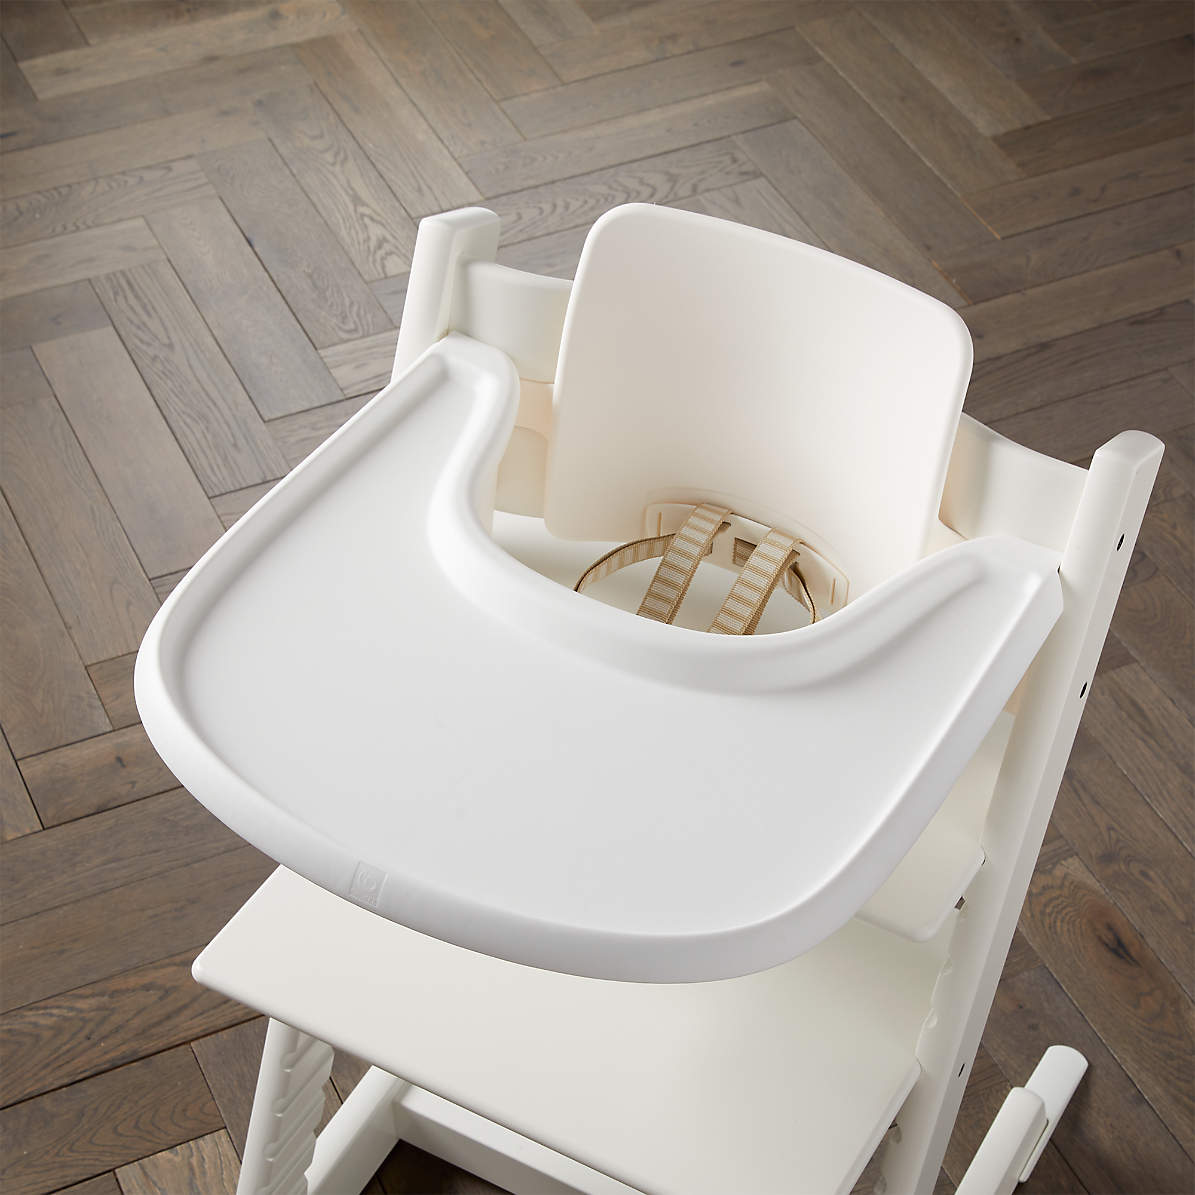 Stokke Tray for High Chair + Reviews 